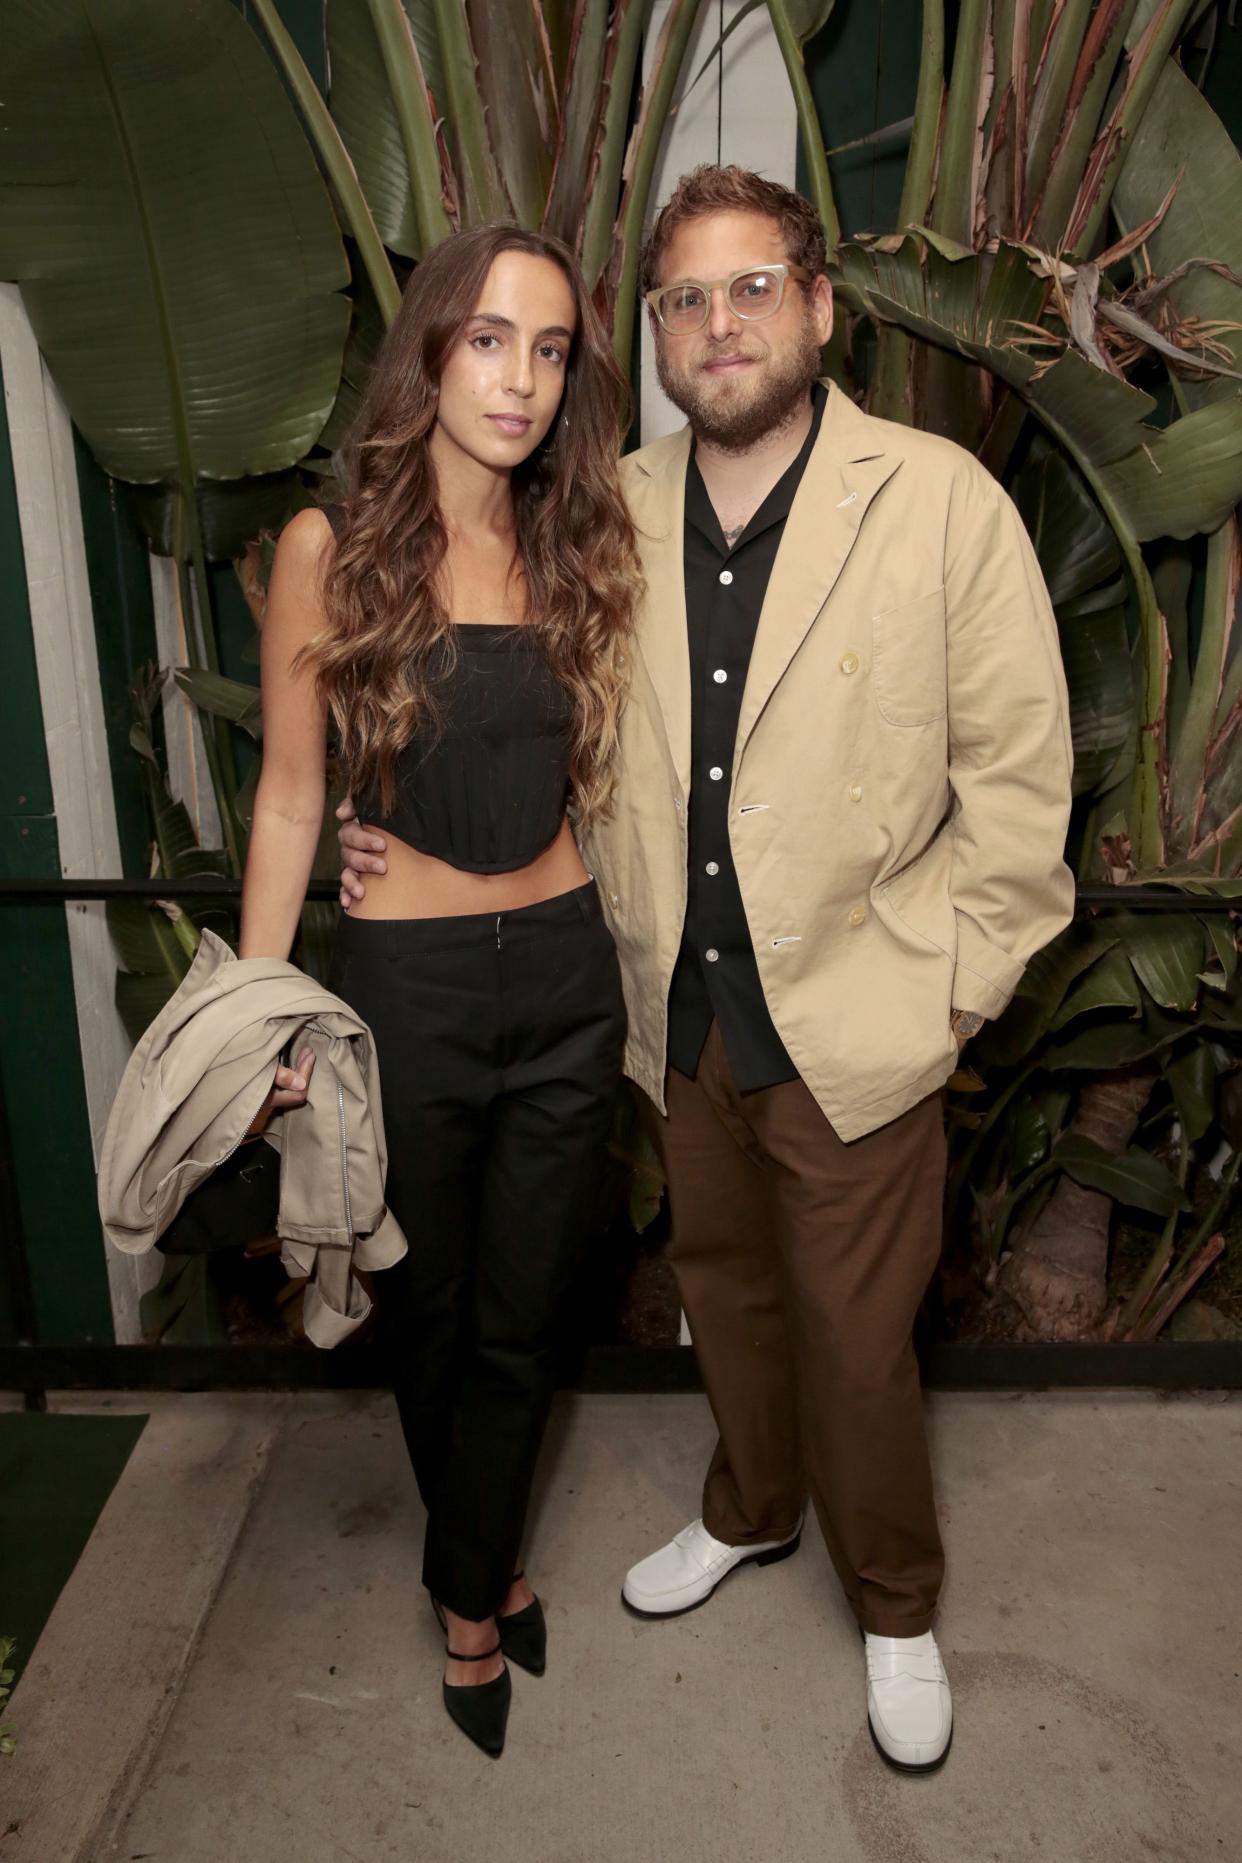 Jonah Hill and his fiancee Gianna Santos have ended their relationship one year after they became engaged in October 2019. The pair were first confirmed to be together in late 2018.